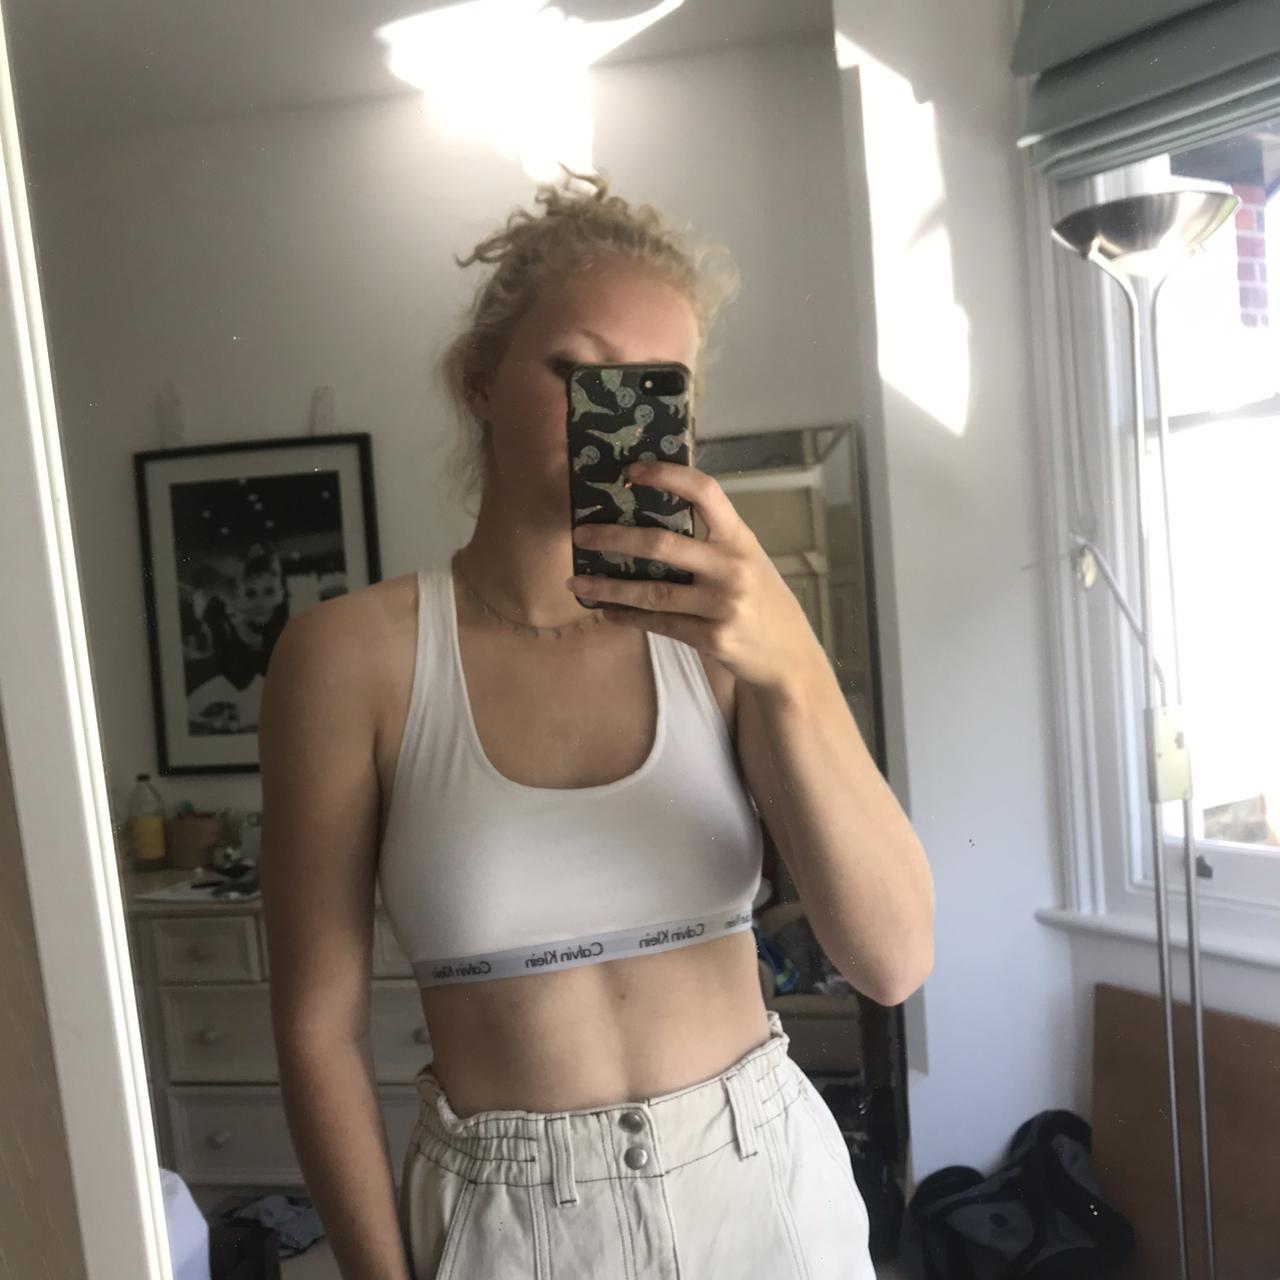 Calvin Klein sports bra, perfect for any size - Depop